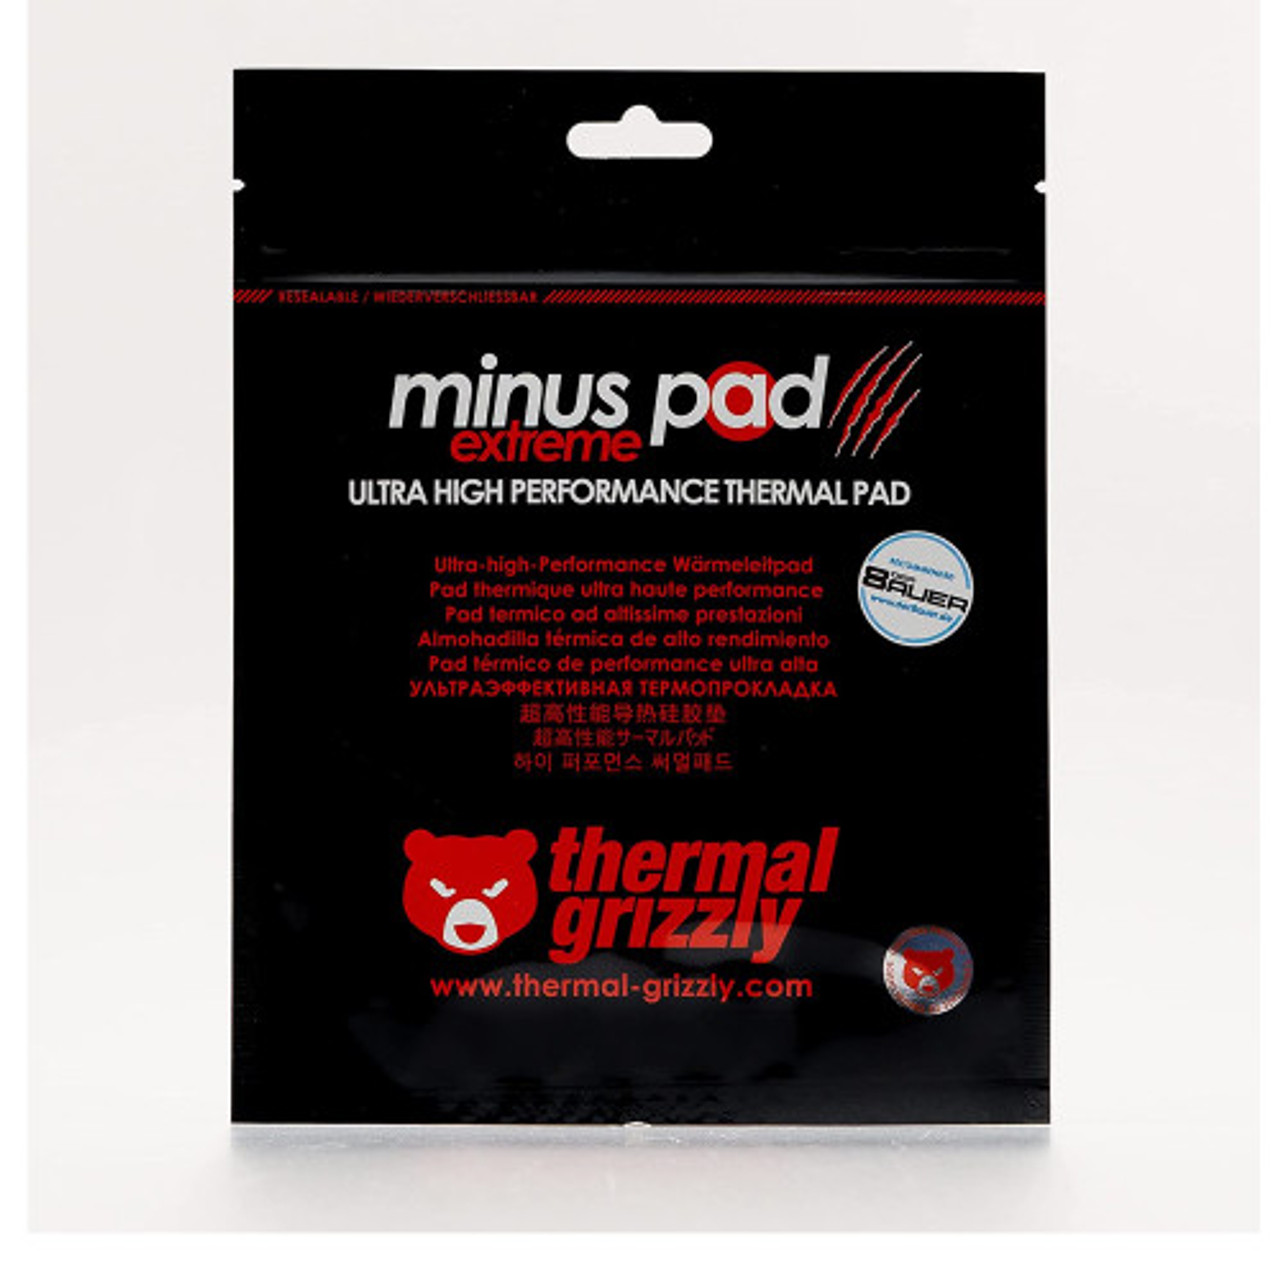 Thermal Grizzly Minus Pad Extreme 120 x 20 x 3.0 (TG-MPE-120-20-30-R)